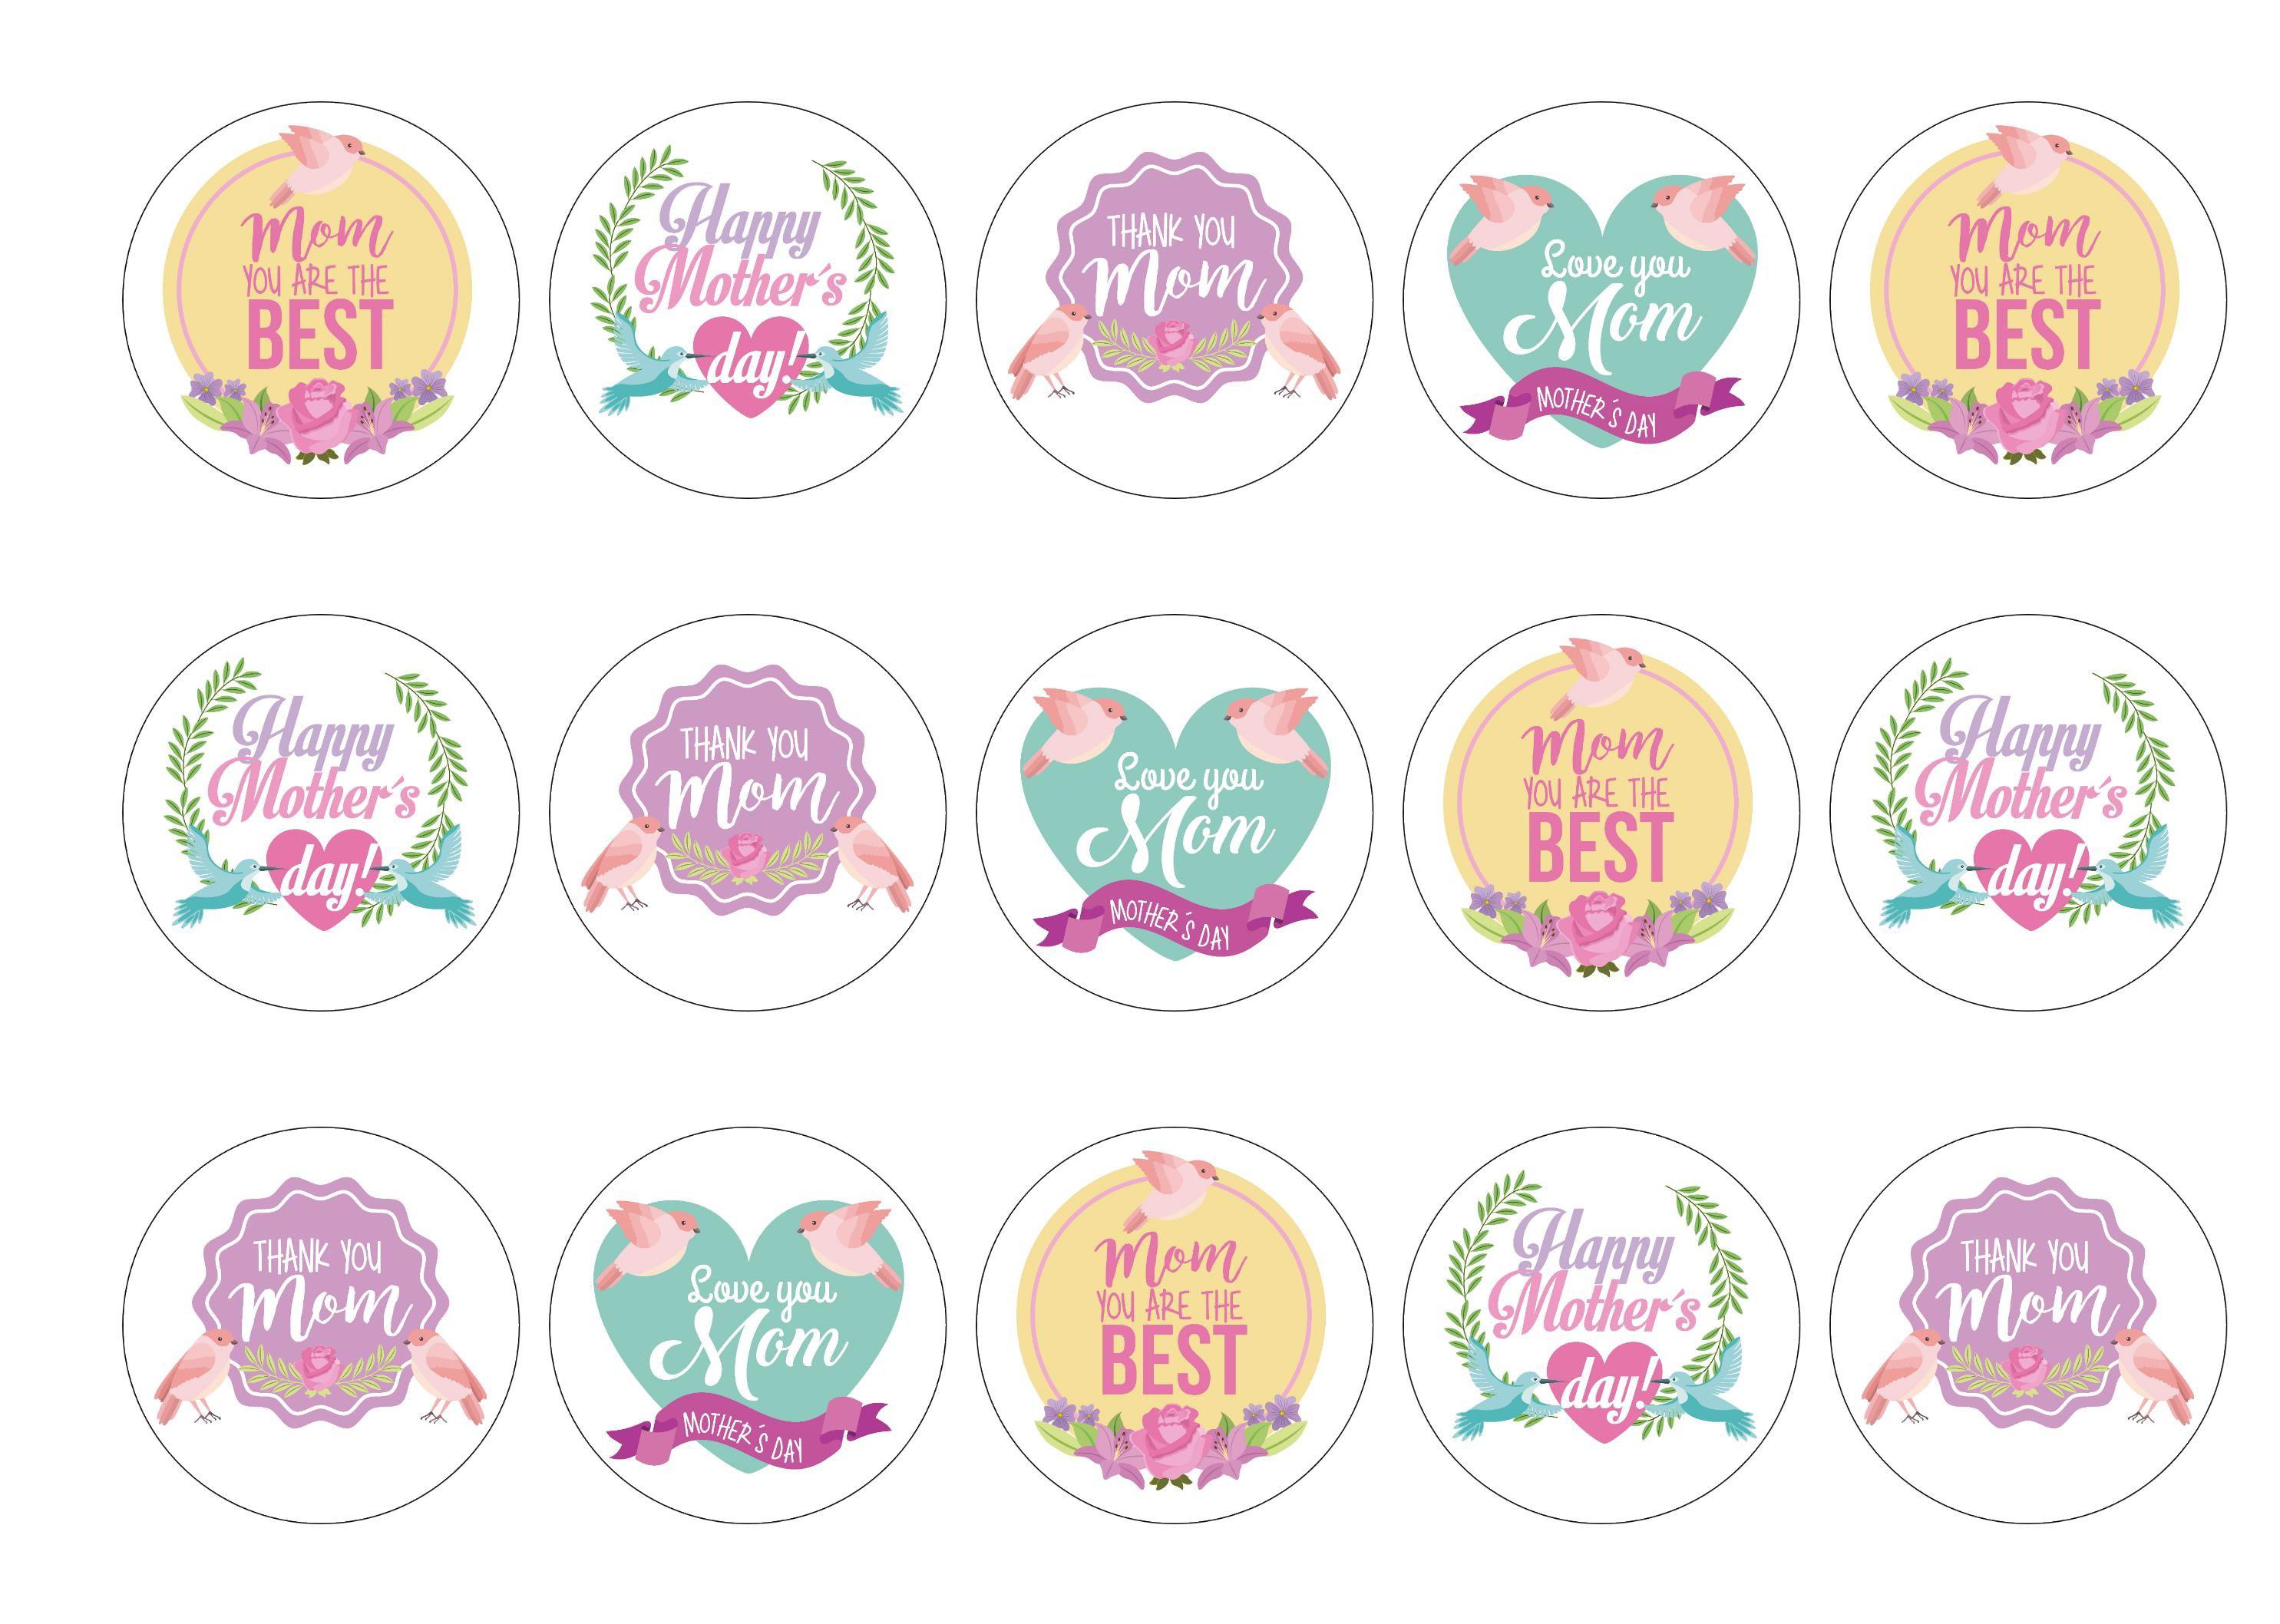 15 Mother's Day cupcake toppers with a bird and flower design